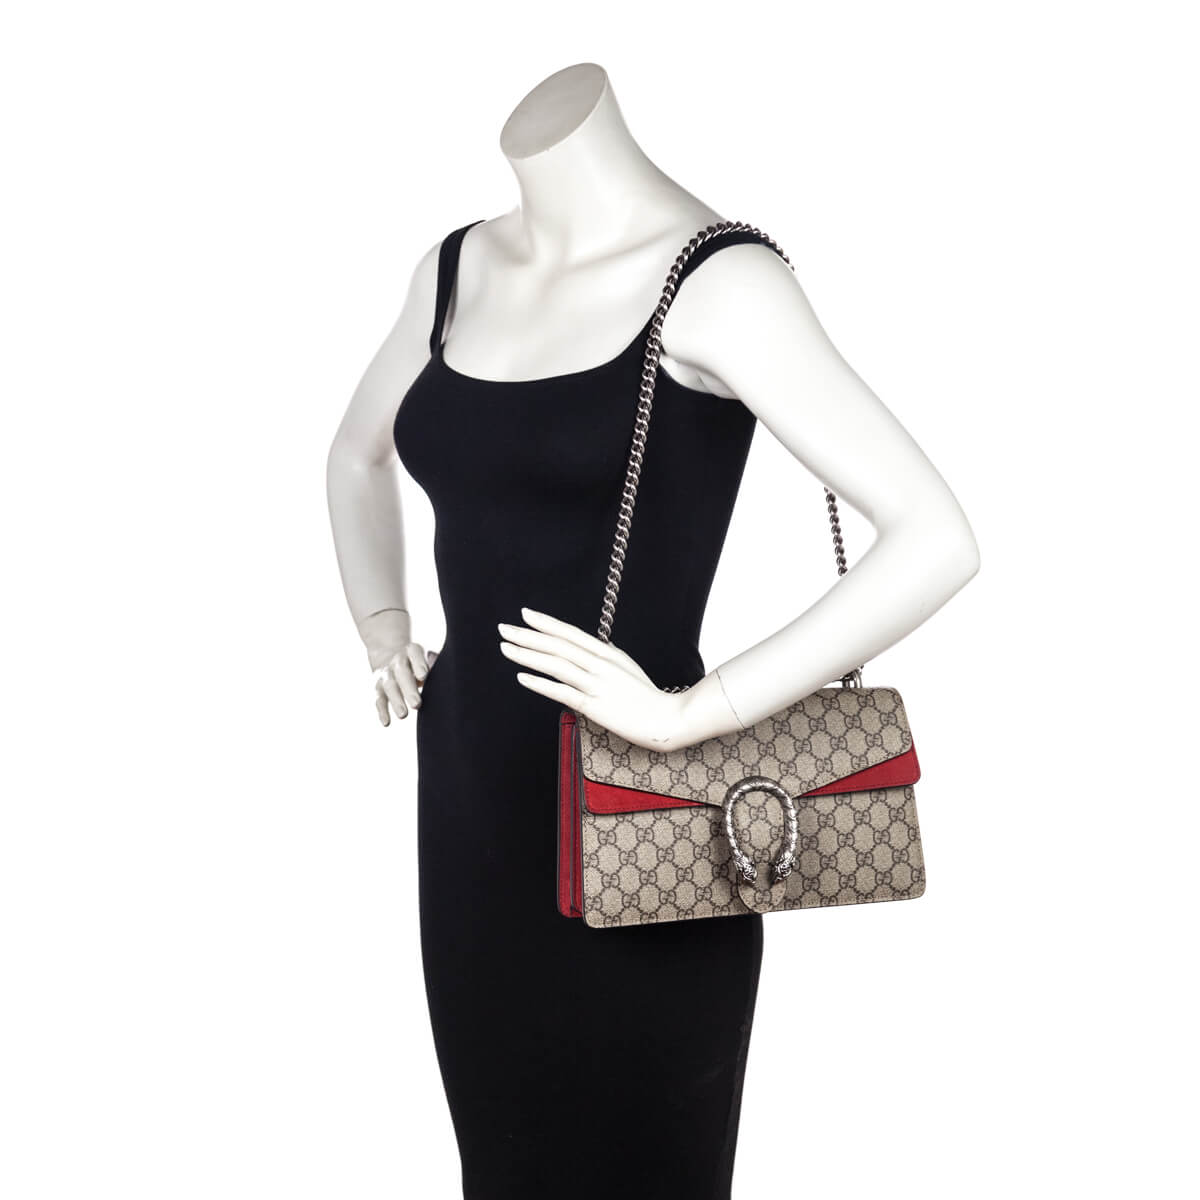 Gucci Beige GG Supreme Red Suede Small Dionysus Bag - Love that Bag etc - Preowned Authentic Designer Handbags & Preloved Fashions